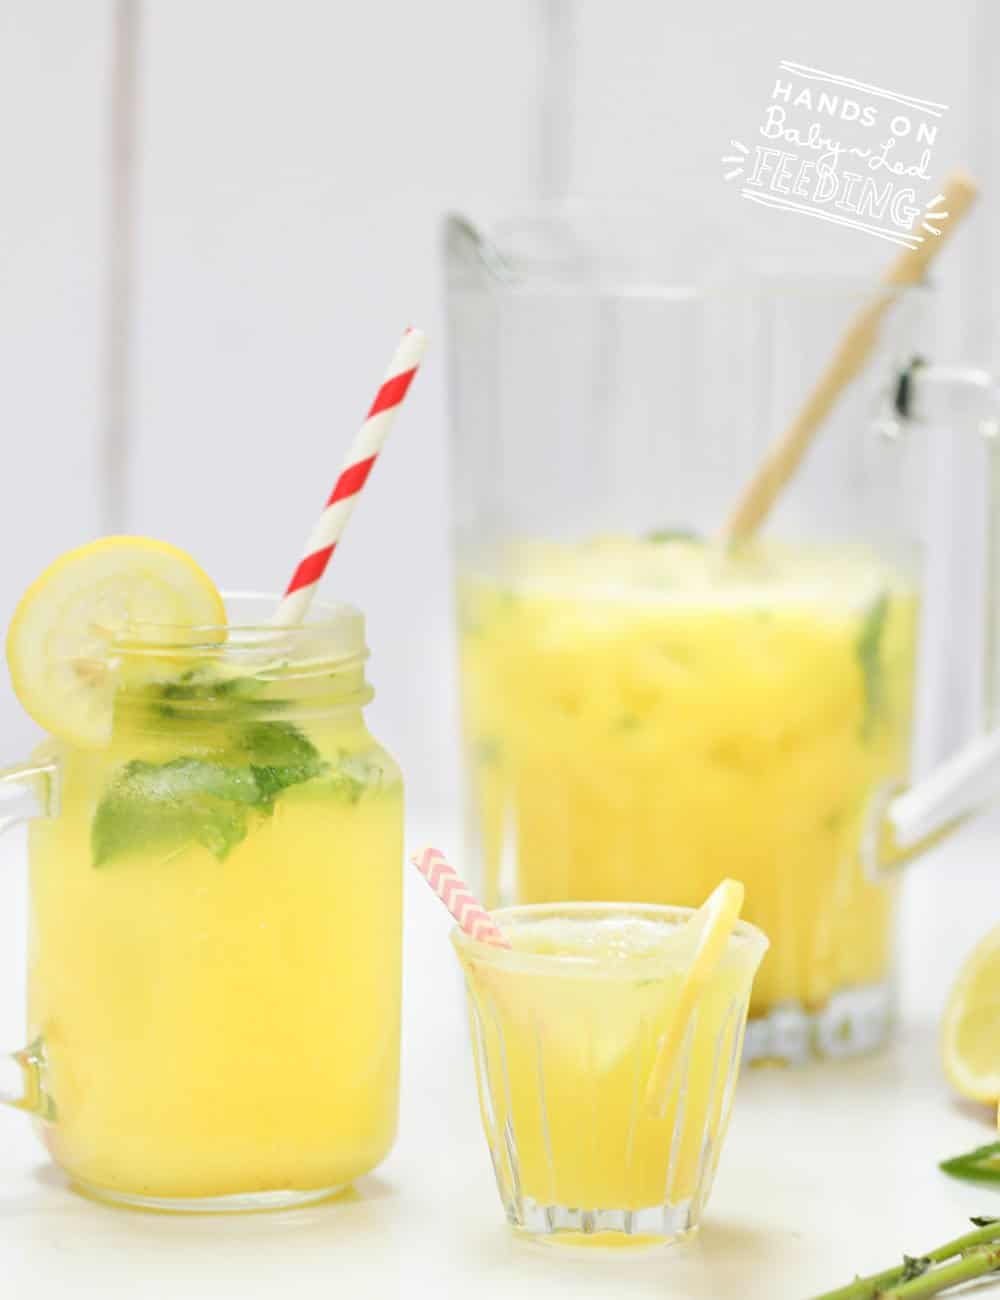 3 Ingredient Refined Sugar Free/ No Sugar Added Lemonade for Kids! Nothing says summer like lemonade but it's usually loaded with sugar, NOT THIS RECIPE! This refreshing sugar free lemonade is all natural and just as sweet tasting as other lemonades. #lemonade #summerdrinks #refinedsugarfree #noaddedsugar #kiddrinks #healthyjuice